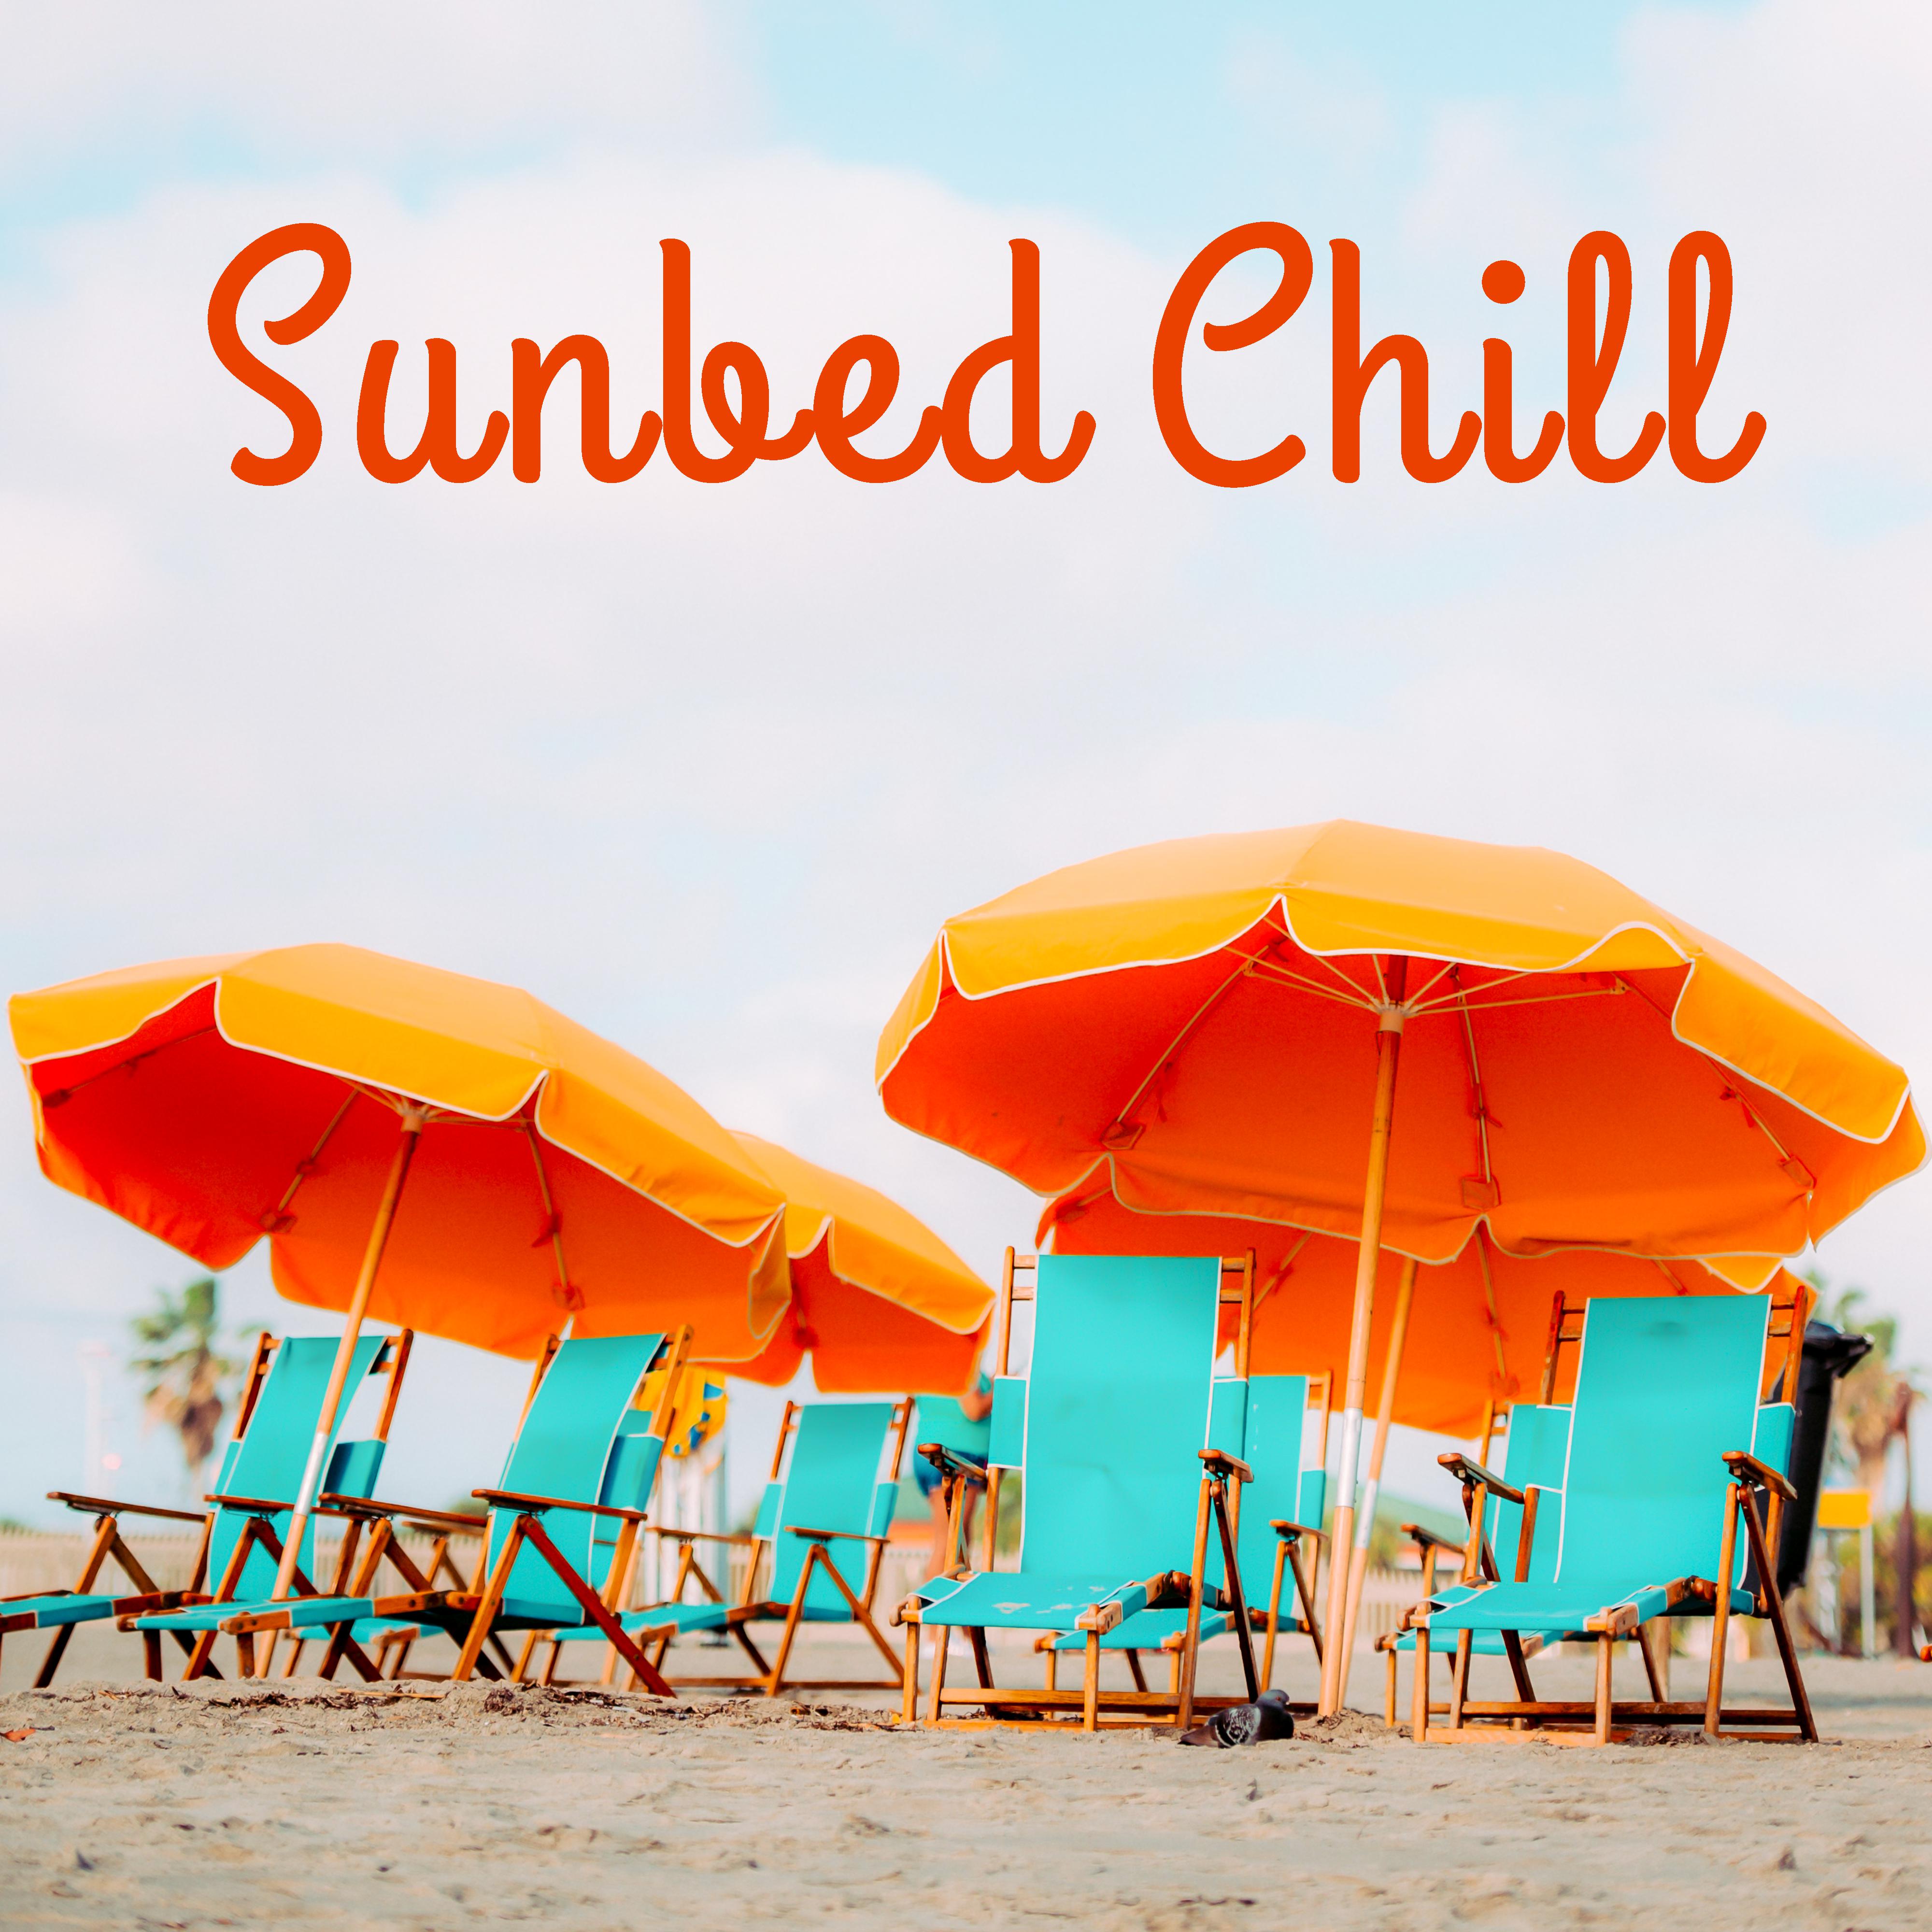 Sunbed Chill – Peaceful Sounds, Ibiza 2017, Summer Chill Out, Relax, Deep Relief, Summer Vibes, Rest